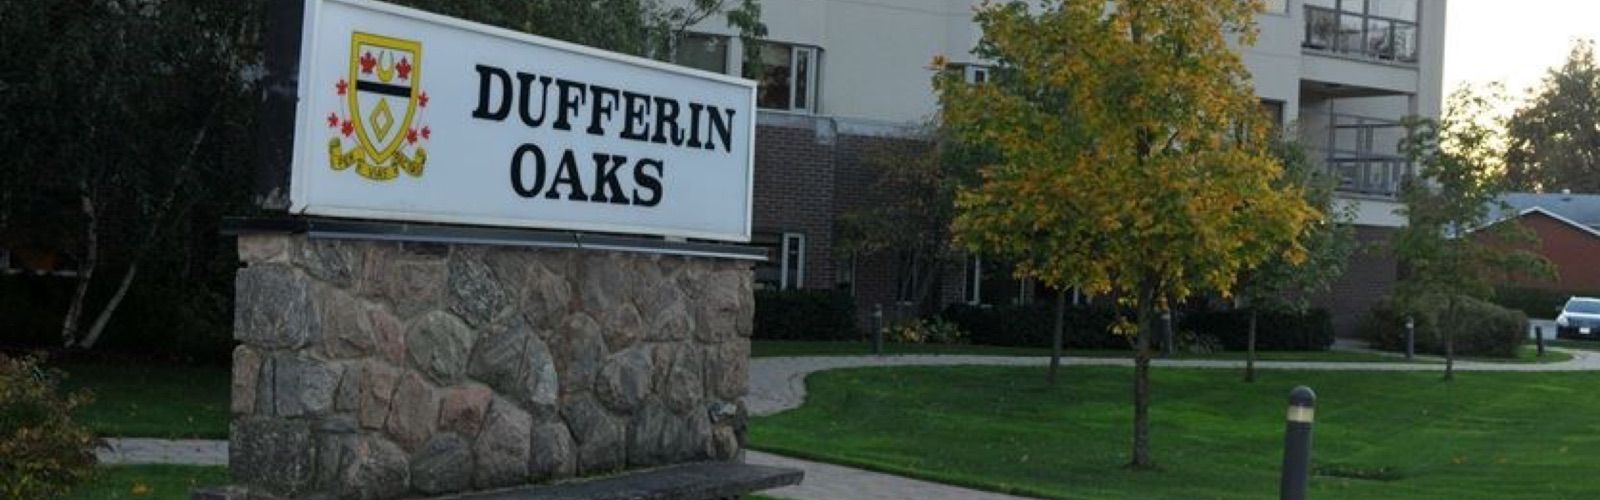 Dufferin Oaks Long Term Care Home sign out front of the building.